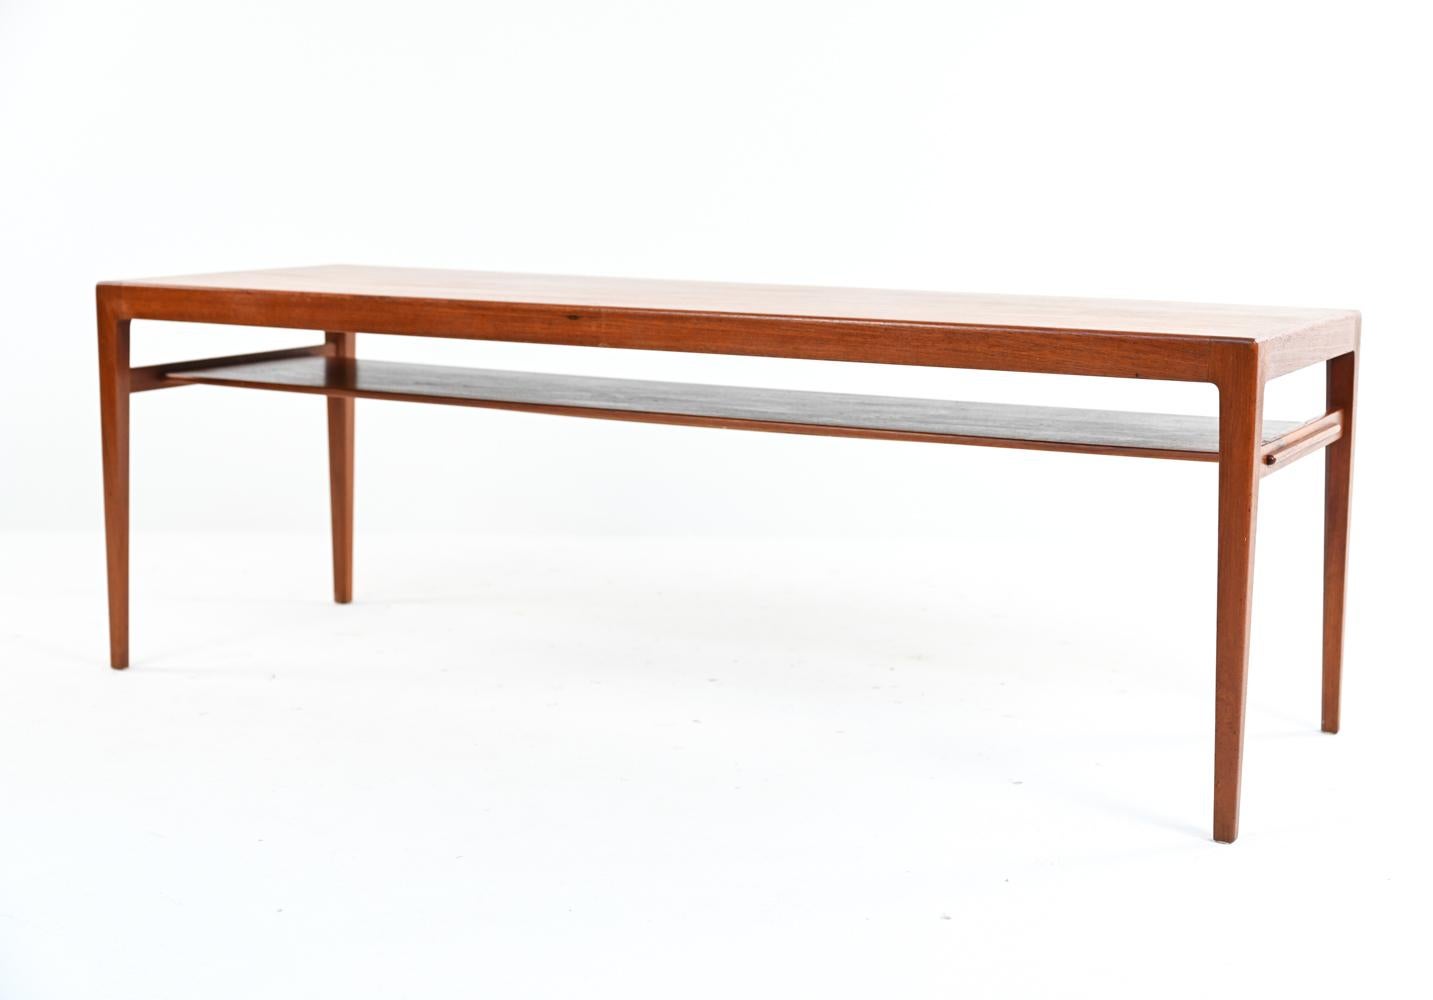 A sleek, minimalist Danish mid-century two-tier coffee table designed and produced by Ludvig Pontoppidan, retaining original manufacturer's label underneath. Quality construction in teak wood featuring tapered legs.